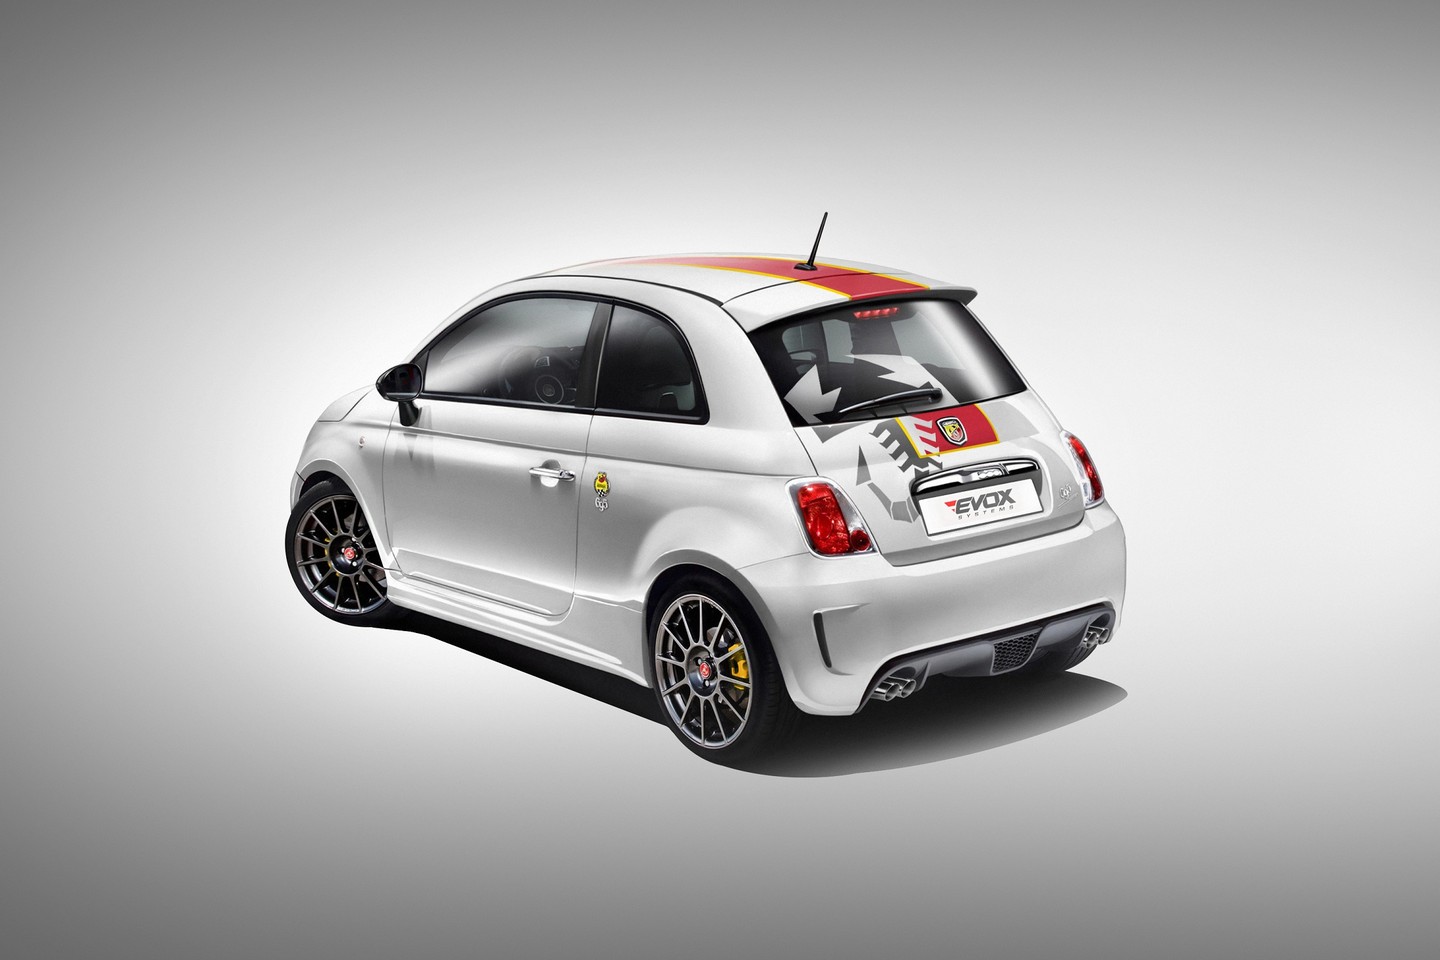 Abarth’s-tuned-models-get-their-own-tuning-courtesy-of-Alpha-N-Performance-3